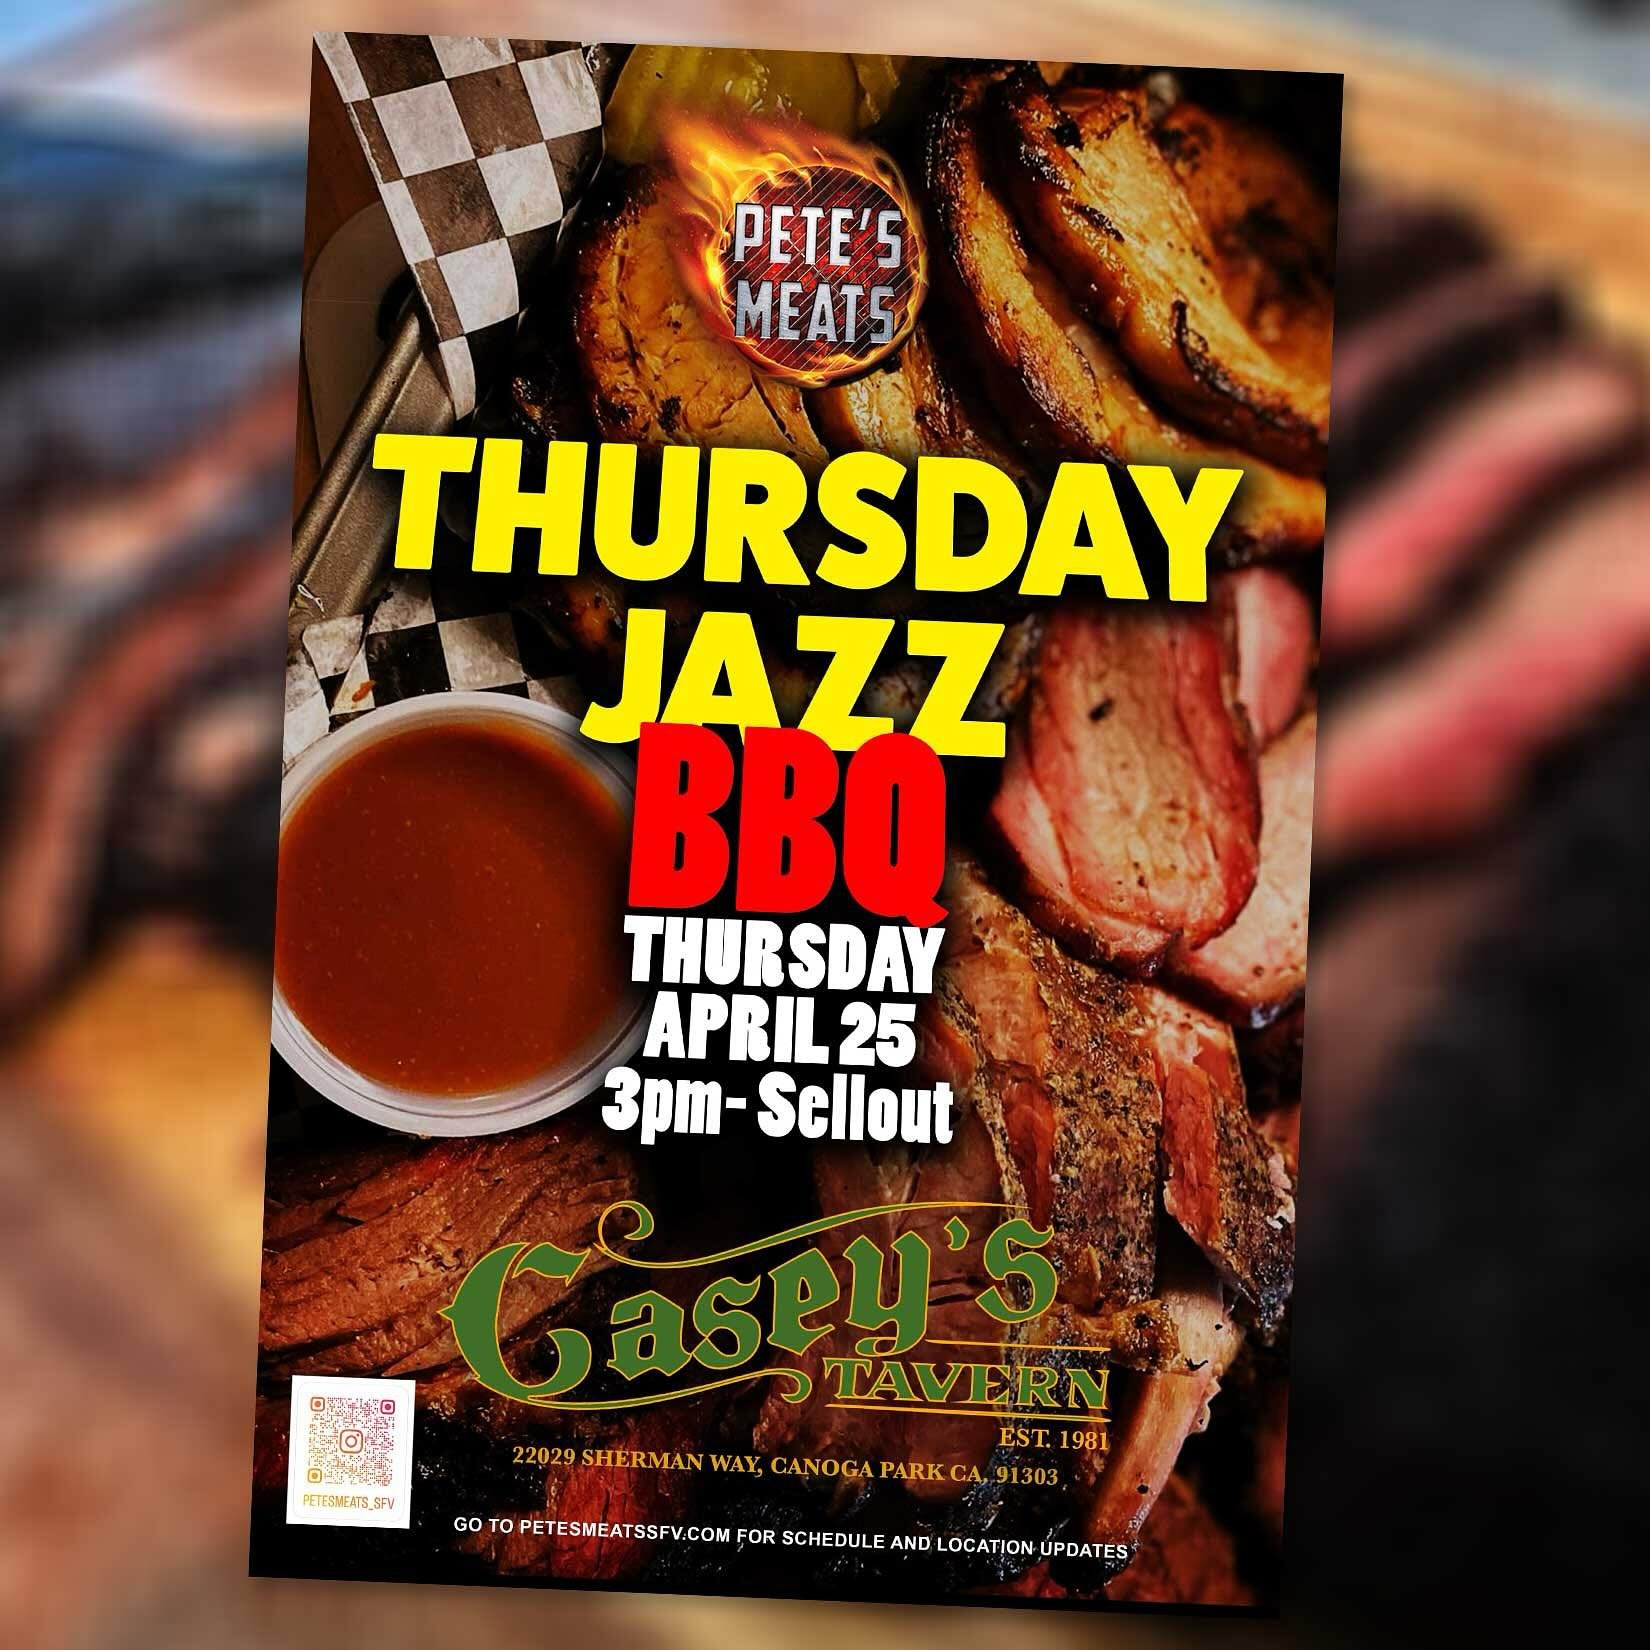 Come and get some meat😜
Back of Casey&rsquo;s 3pm-Sellout.
Casey&rsquo;s Jazz starts at 8pm-11pm